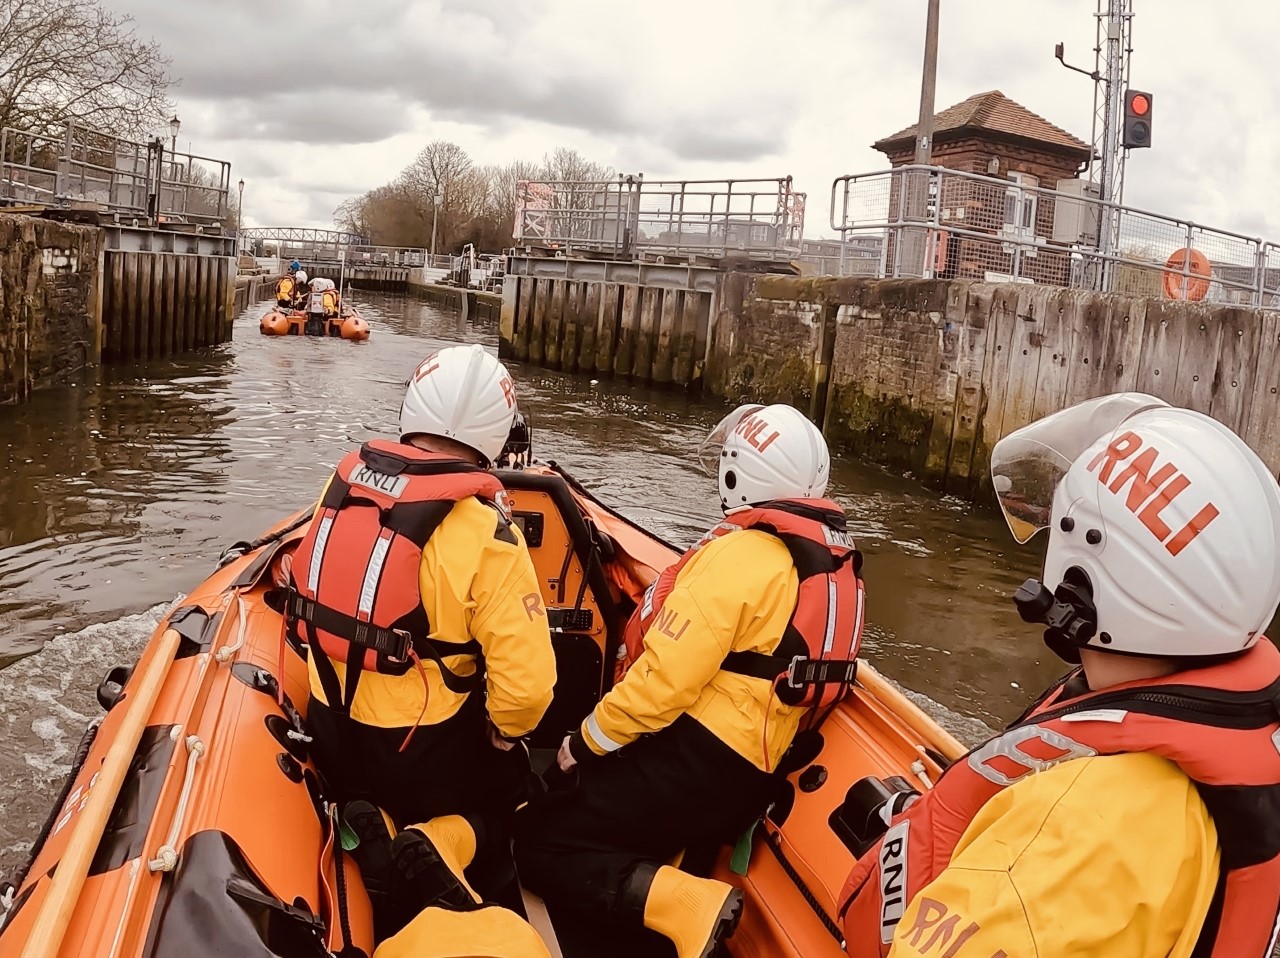 In our latest UP CLOSE feature, Nub News caught up with the Teddington RNLI lifeboat station, which has been saving lives on the River Thames for over 20 years